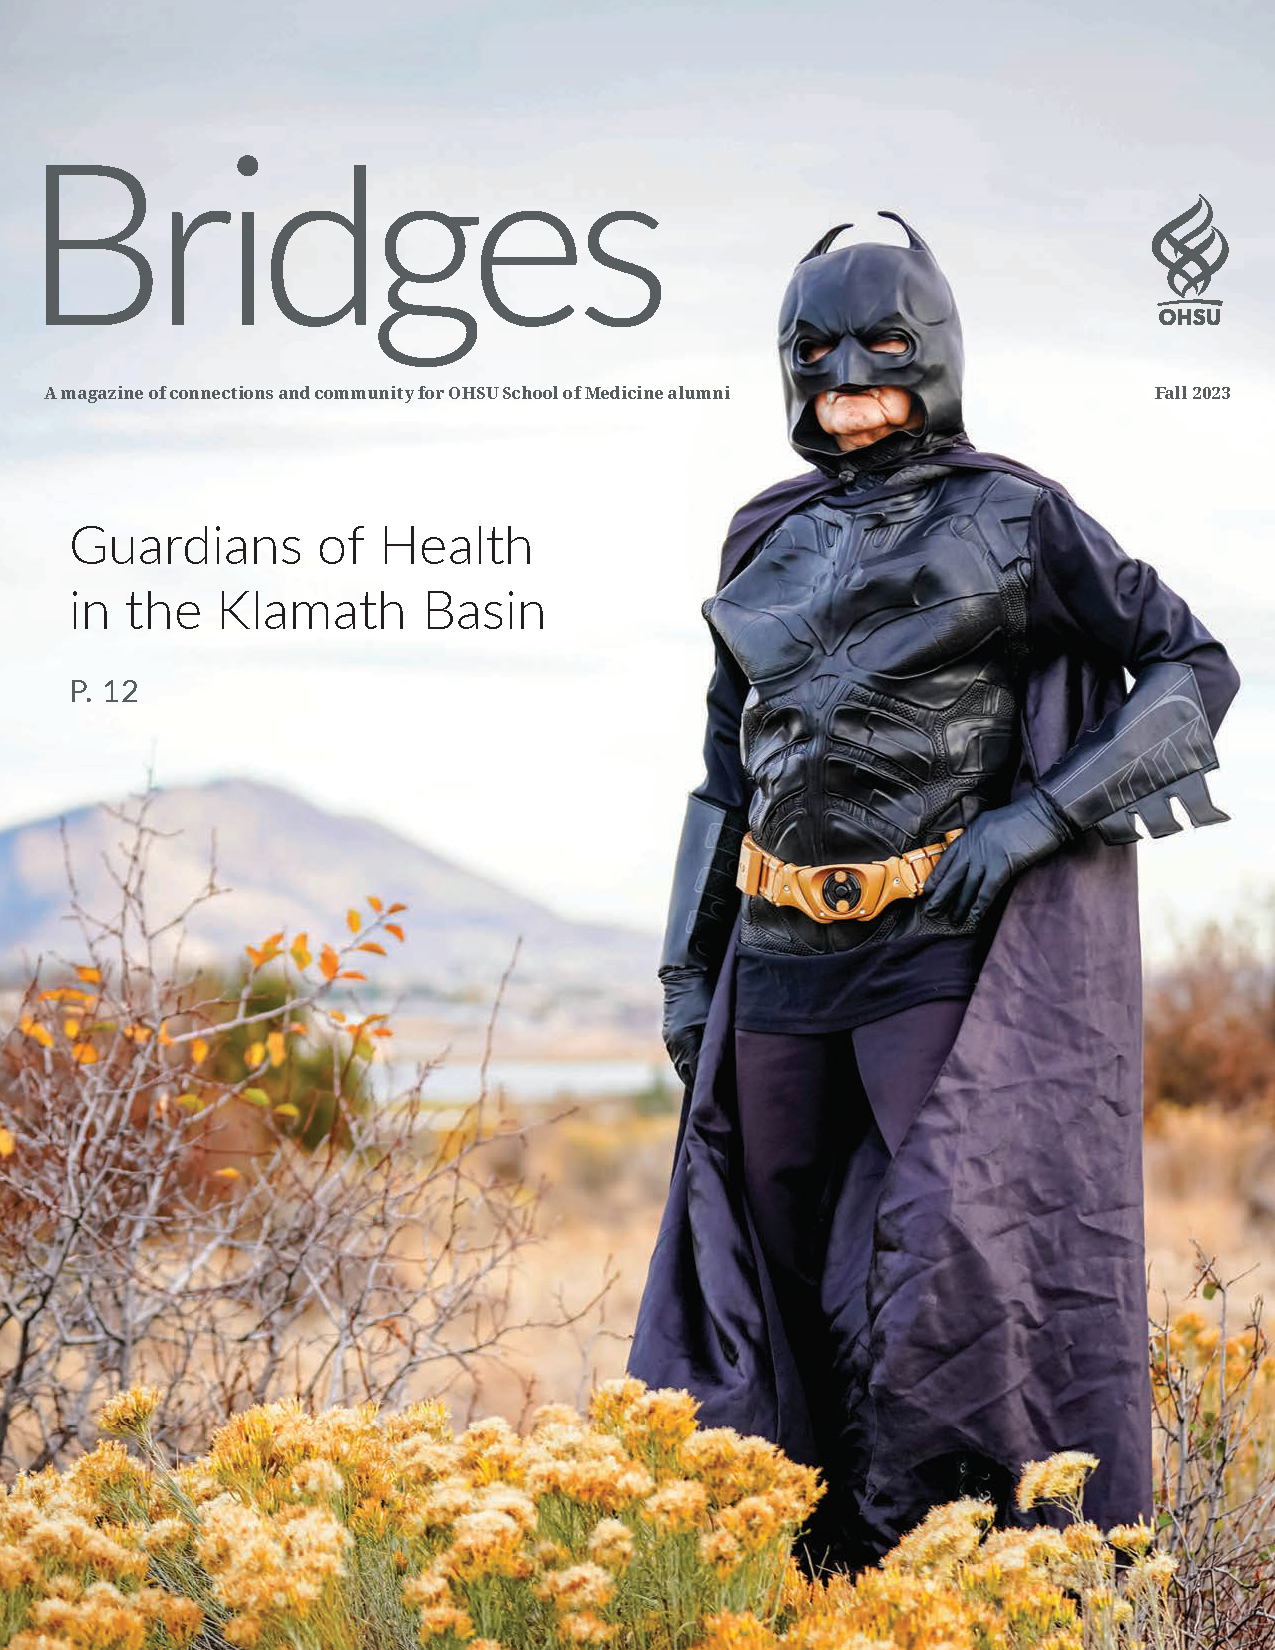 Cover of magazine with a man dressed as batman